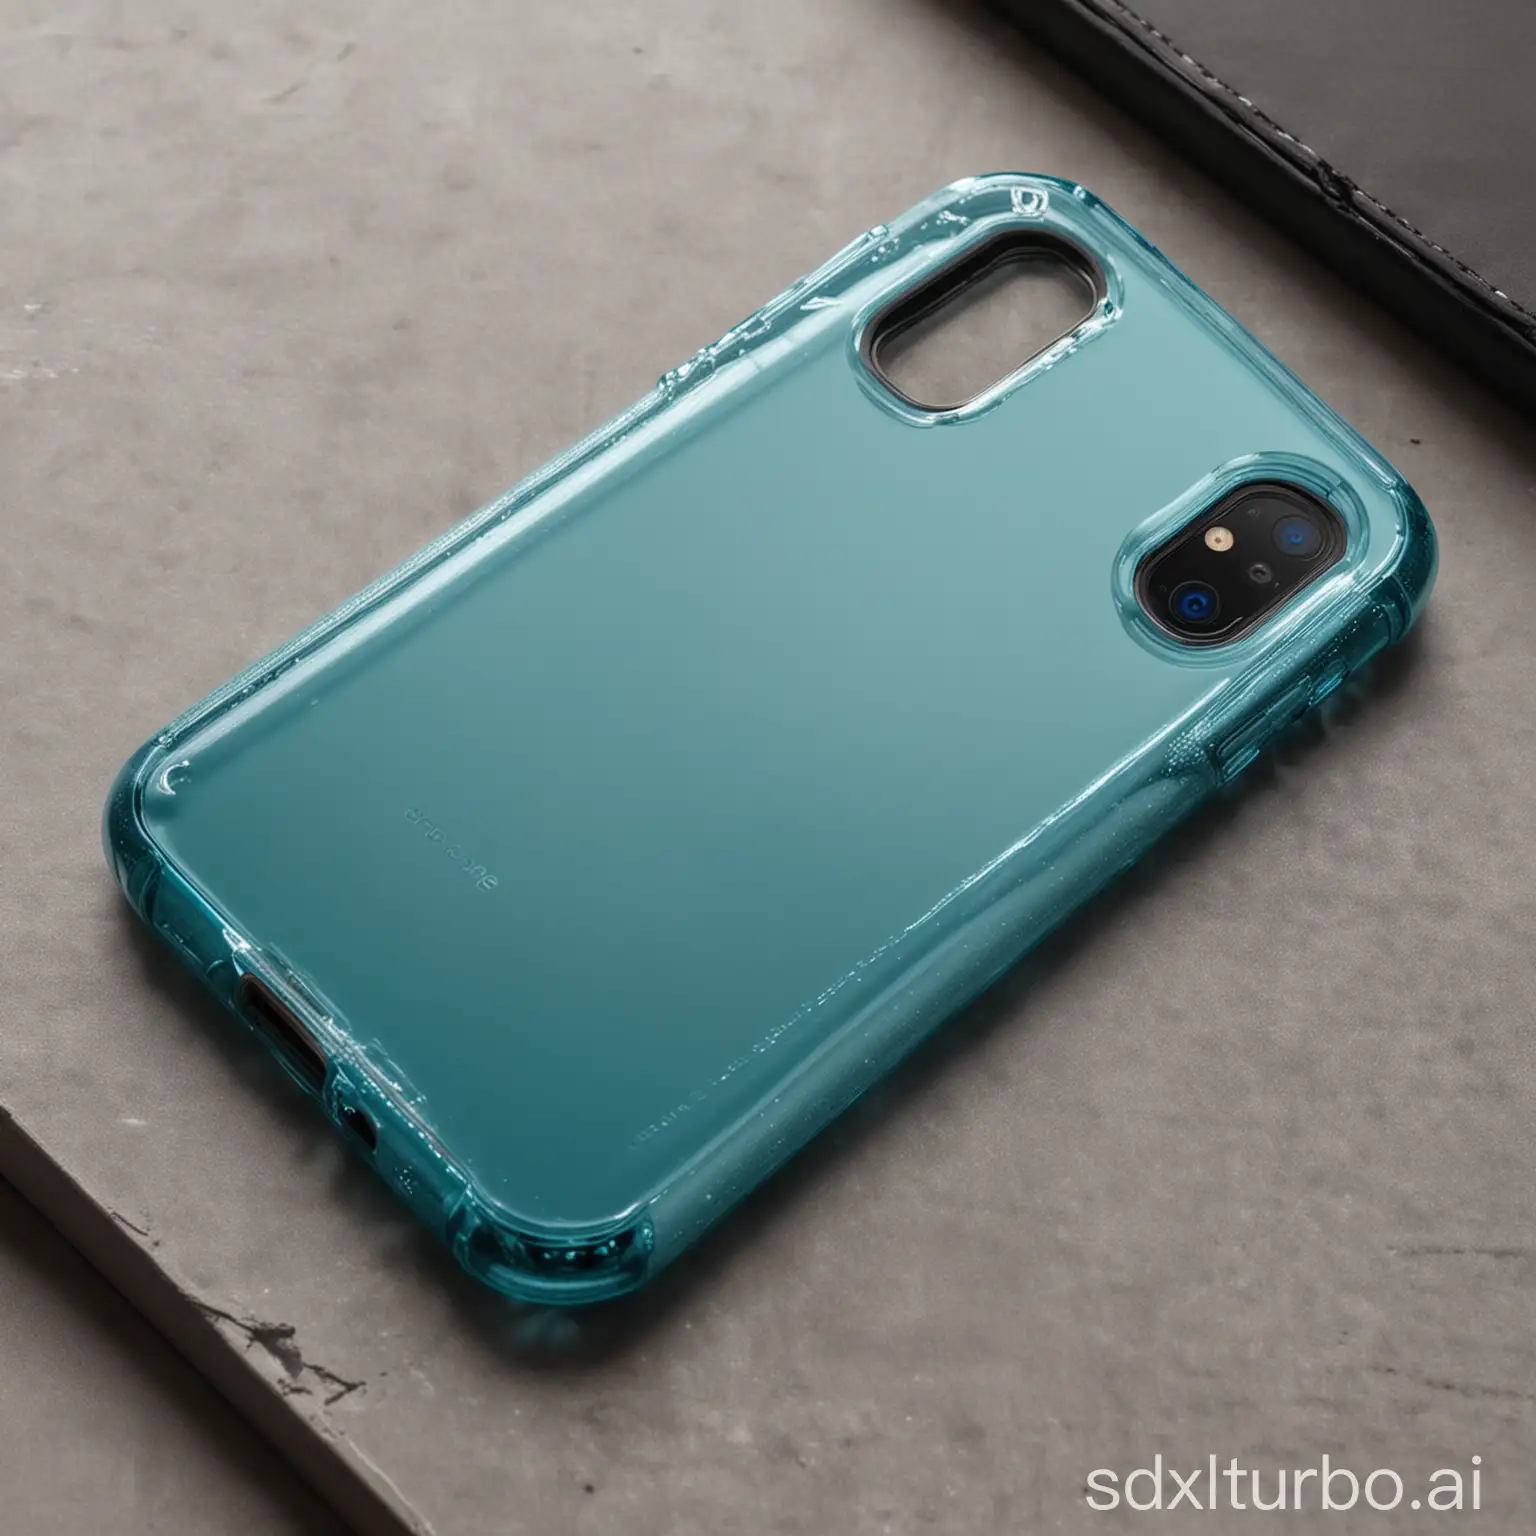 A close-up of a shiny new aqua blue phone case with a sleek design. The case is made of a durable material that will protect the phone from drops and scratches. The case has a raised lip around the edges of the screen to protect it from damage.